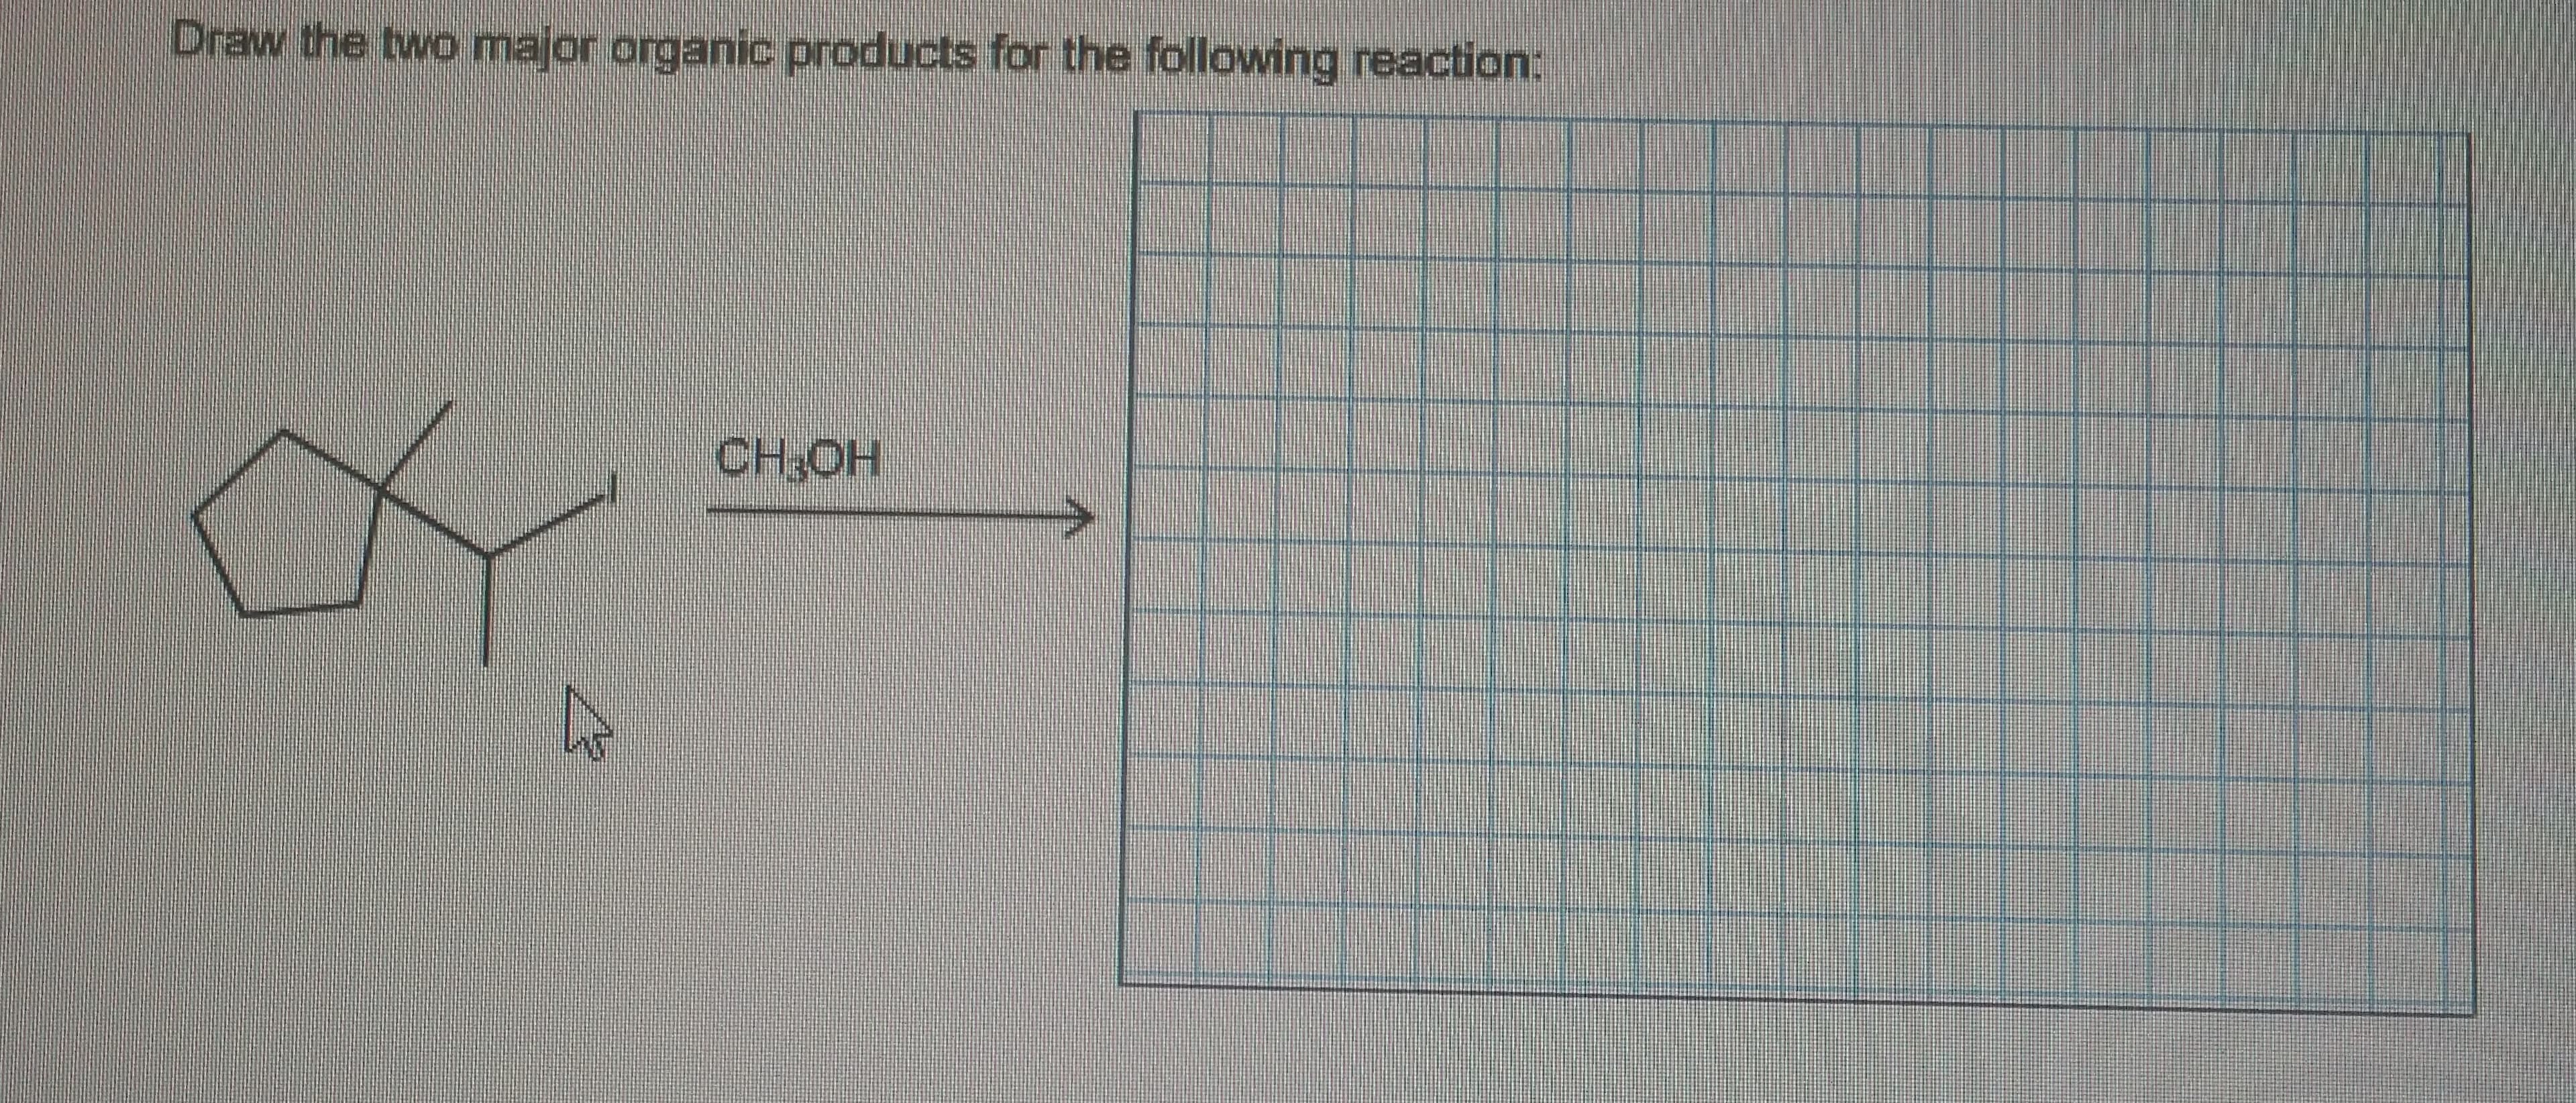 Draw the two major organic products for the following reaction:
CH OH
